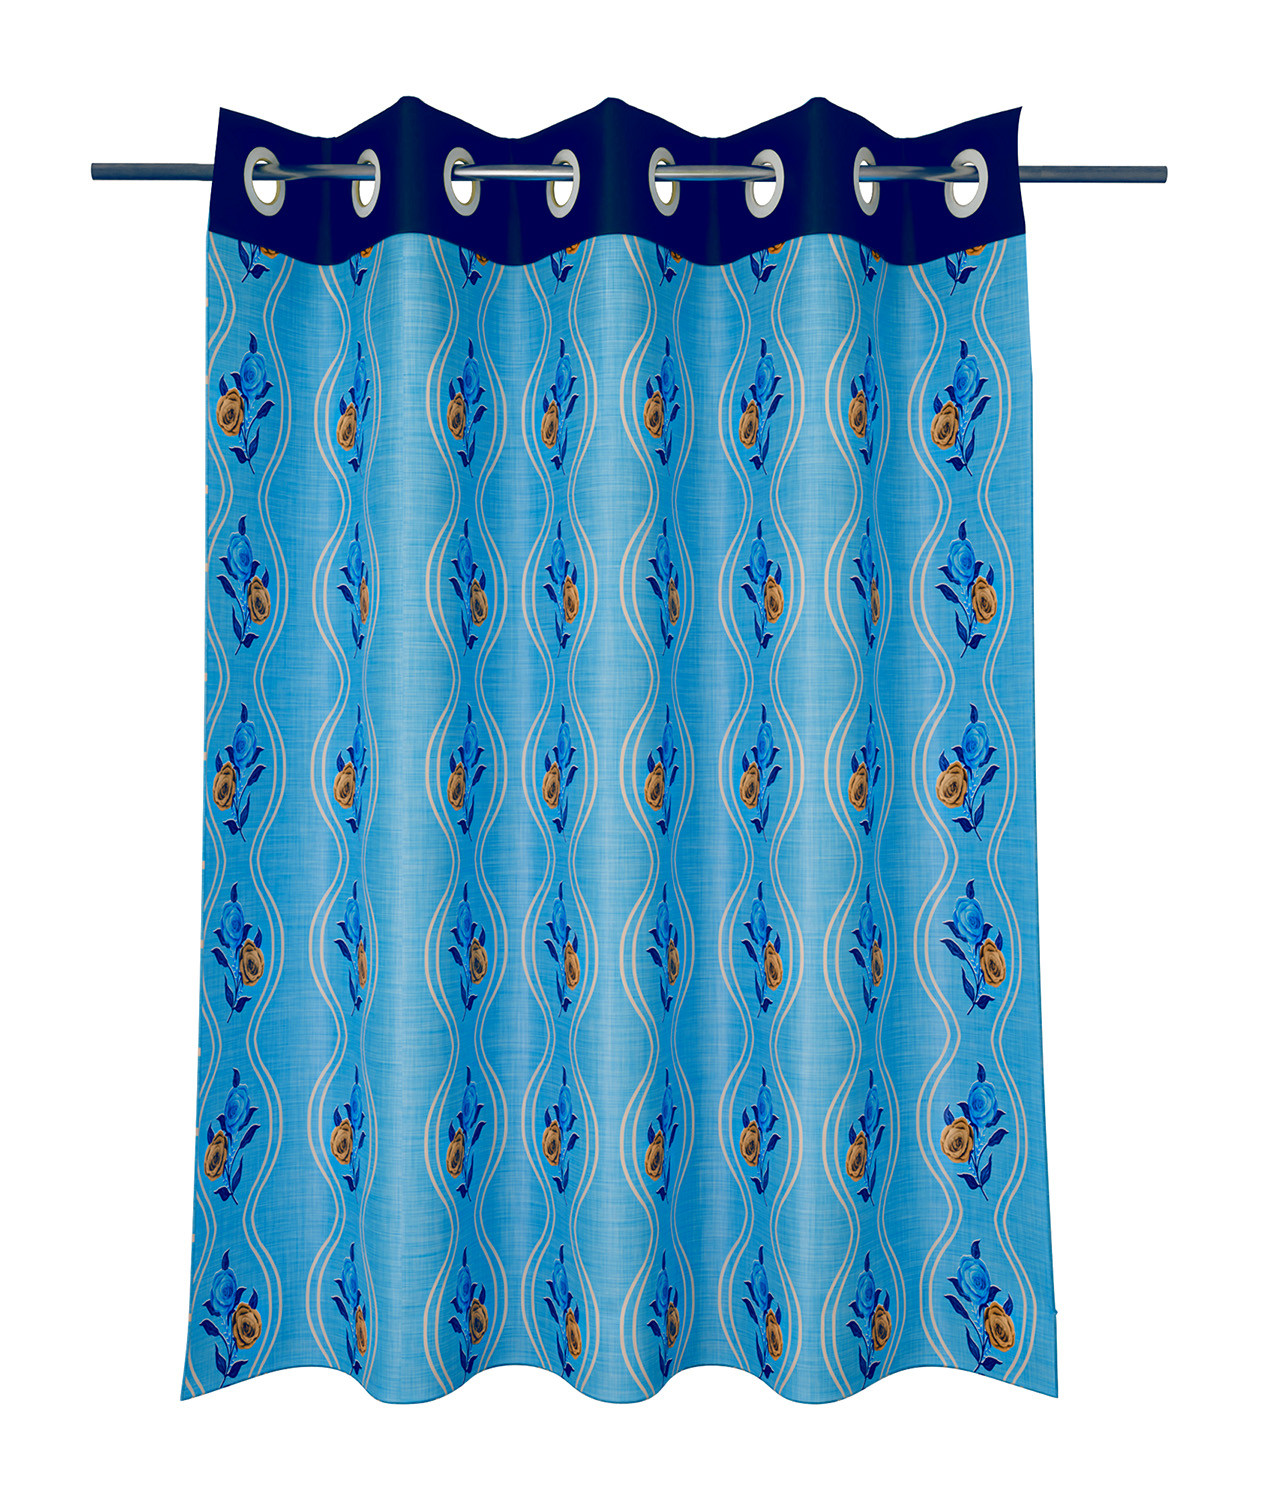 Kuber Industries Polyester Decorative 9 Feet Long Door Curtain | Rose Print Blackout Drapes Curtain With 8 Eyelet For Home & Office (Blue)